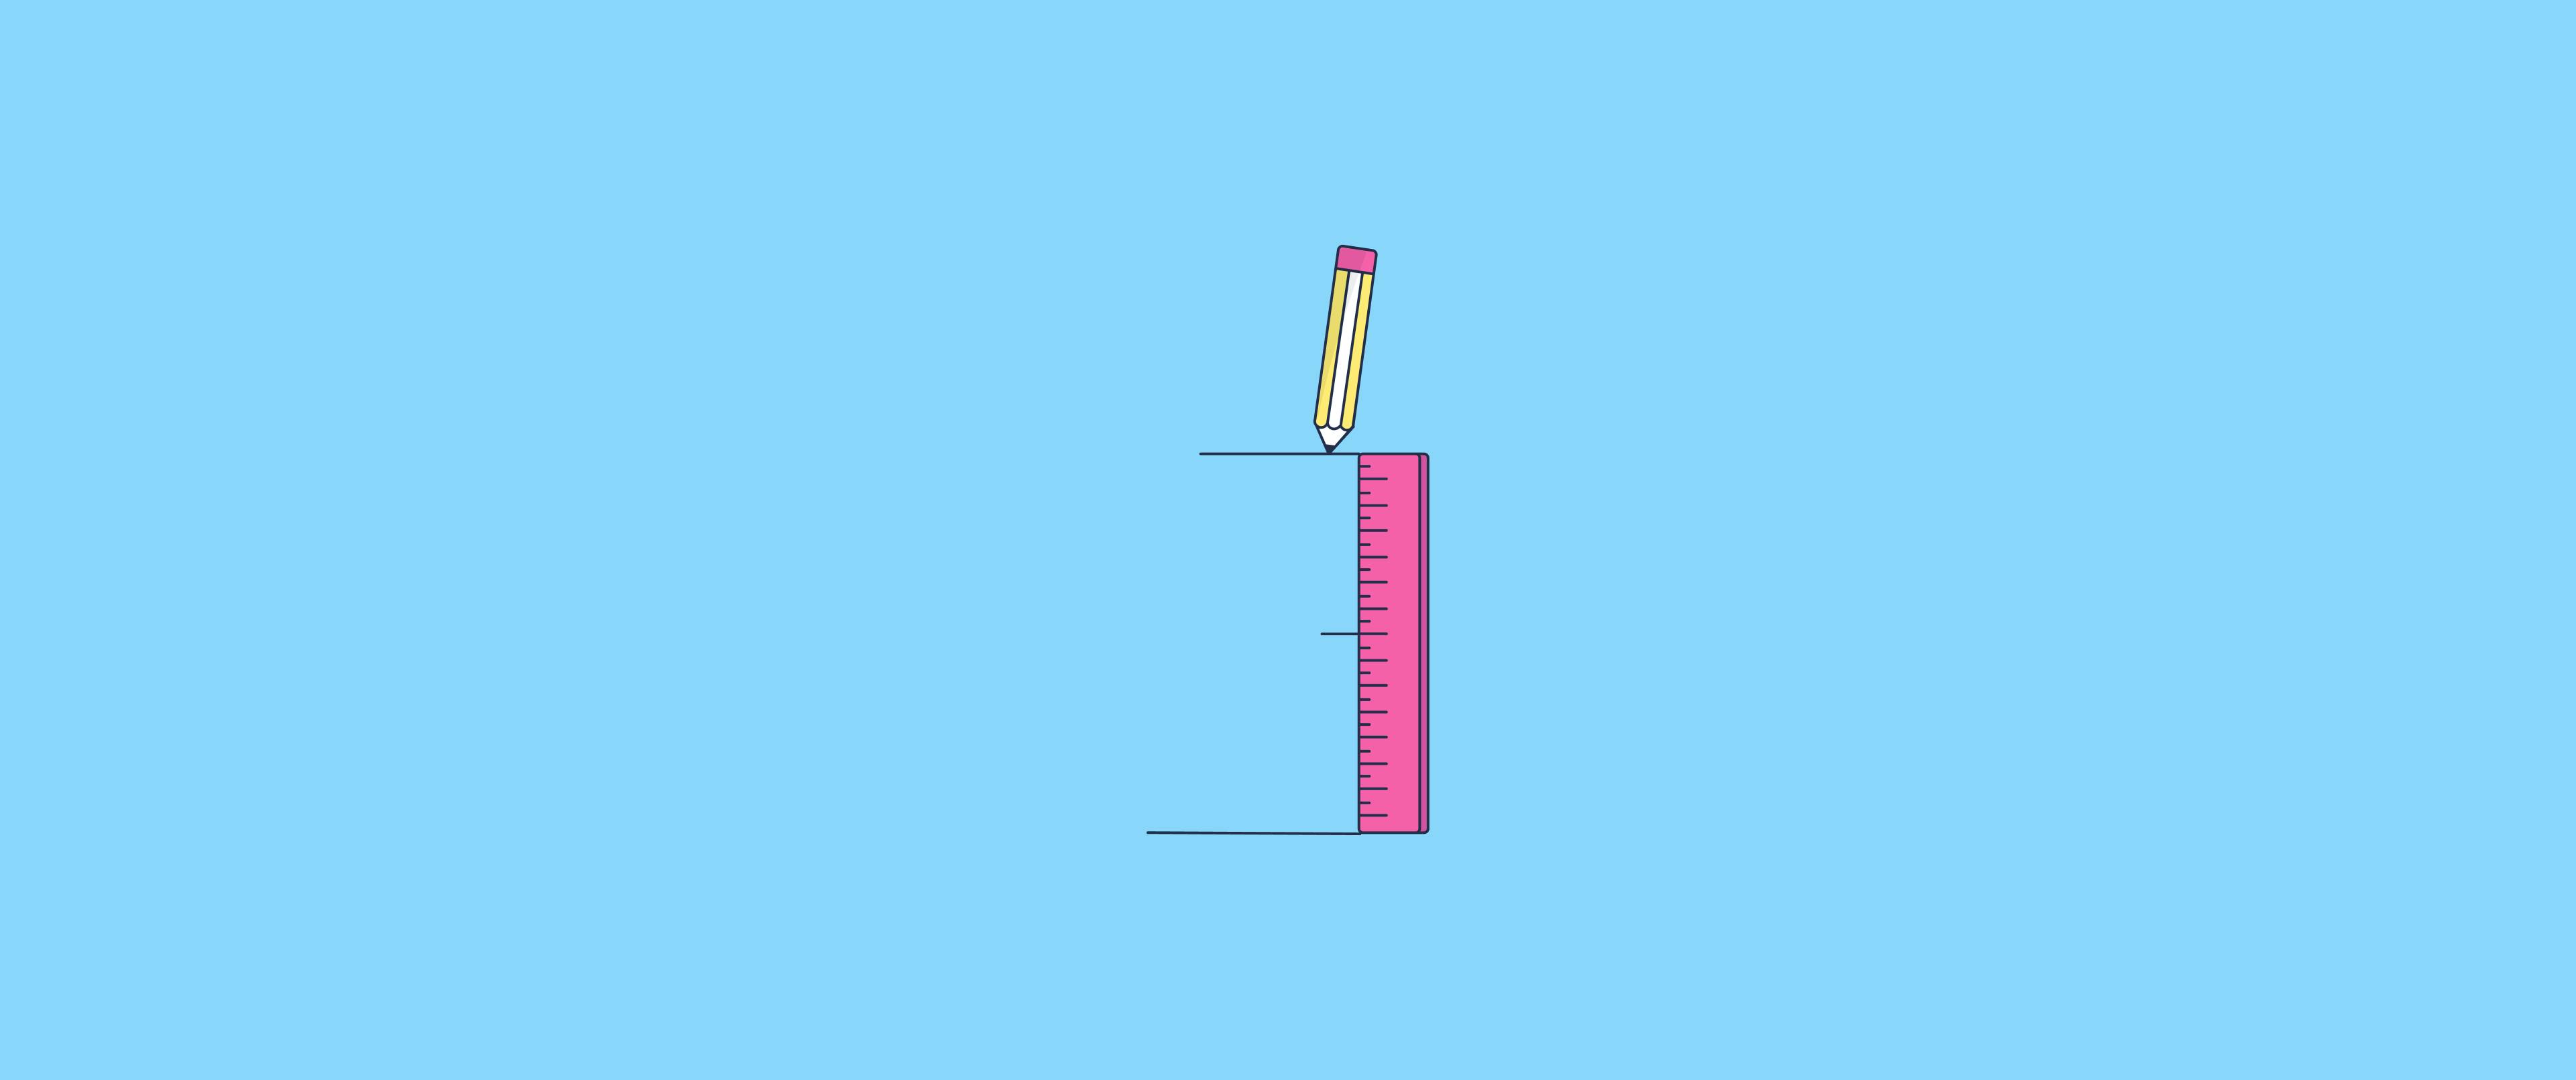 Illustration of a pencil alongside a ruler, symbolizing the analysis and measurement of investment performance.